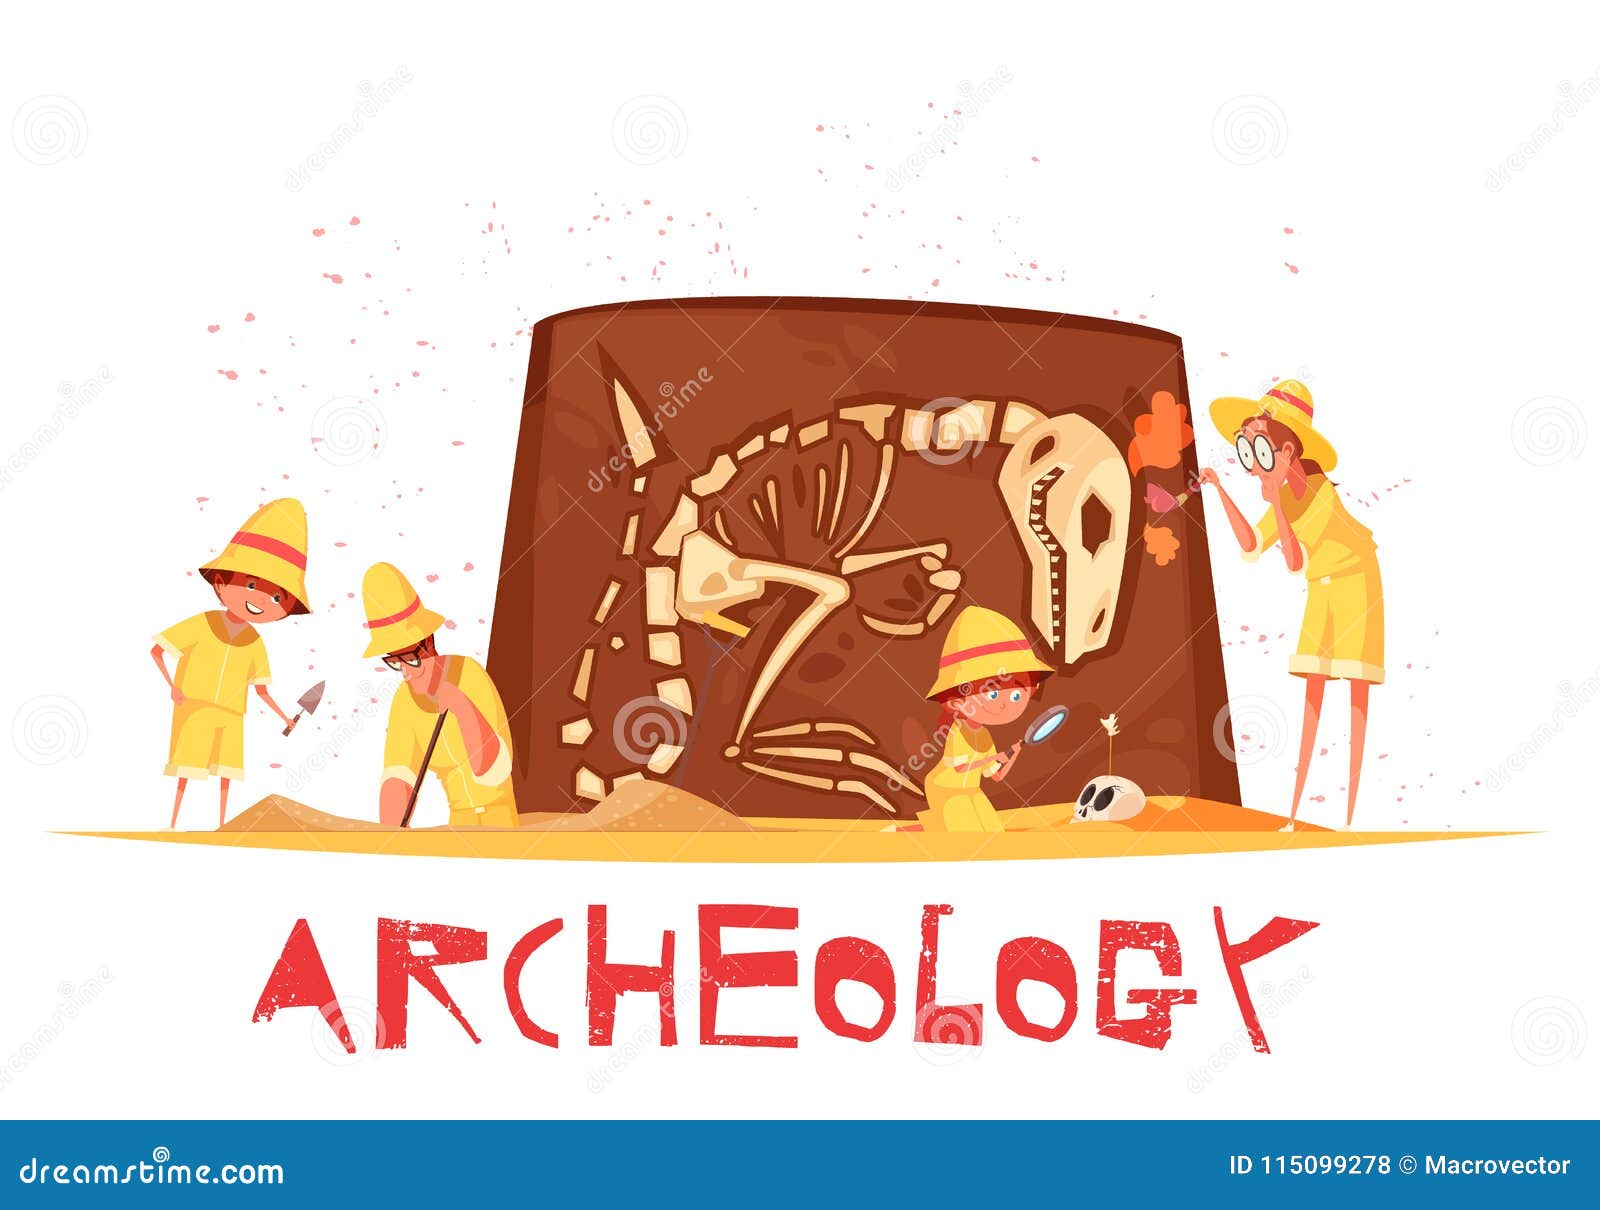 Archaeological Cartoons, Illustrations & Vector Stock Images - 4062